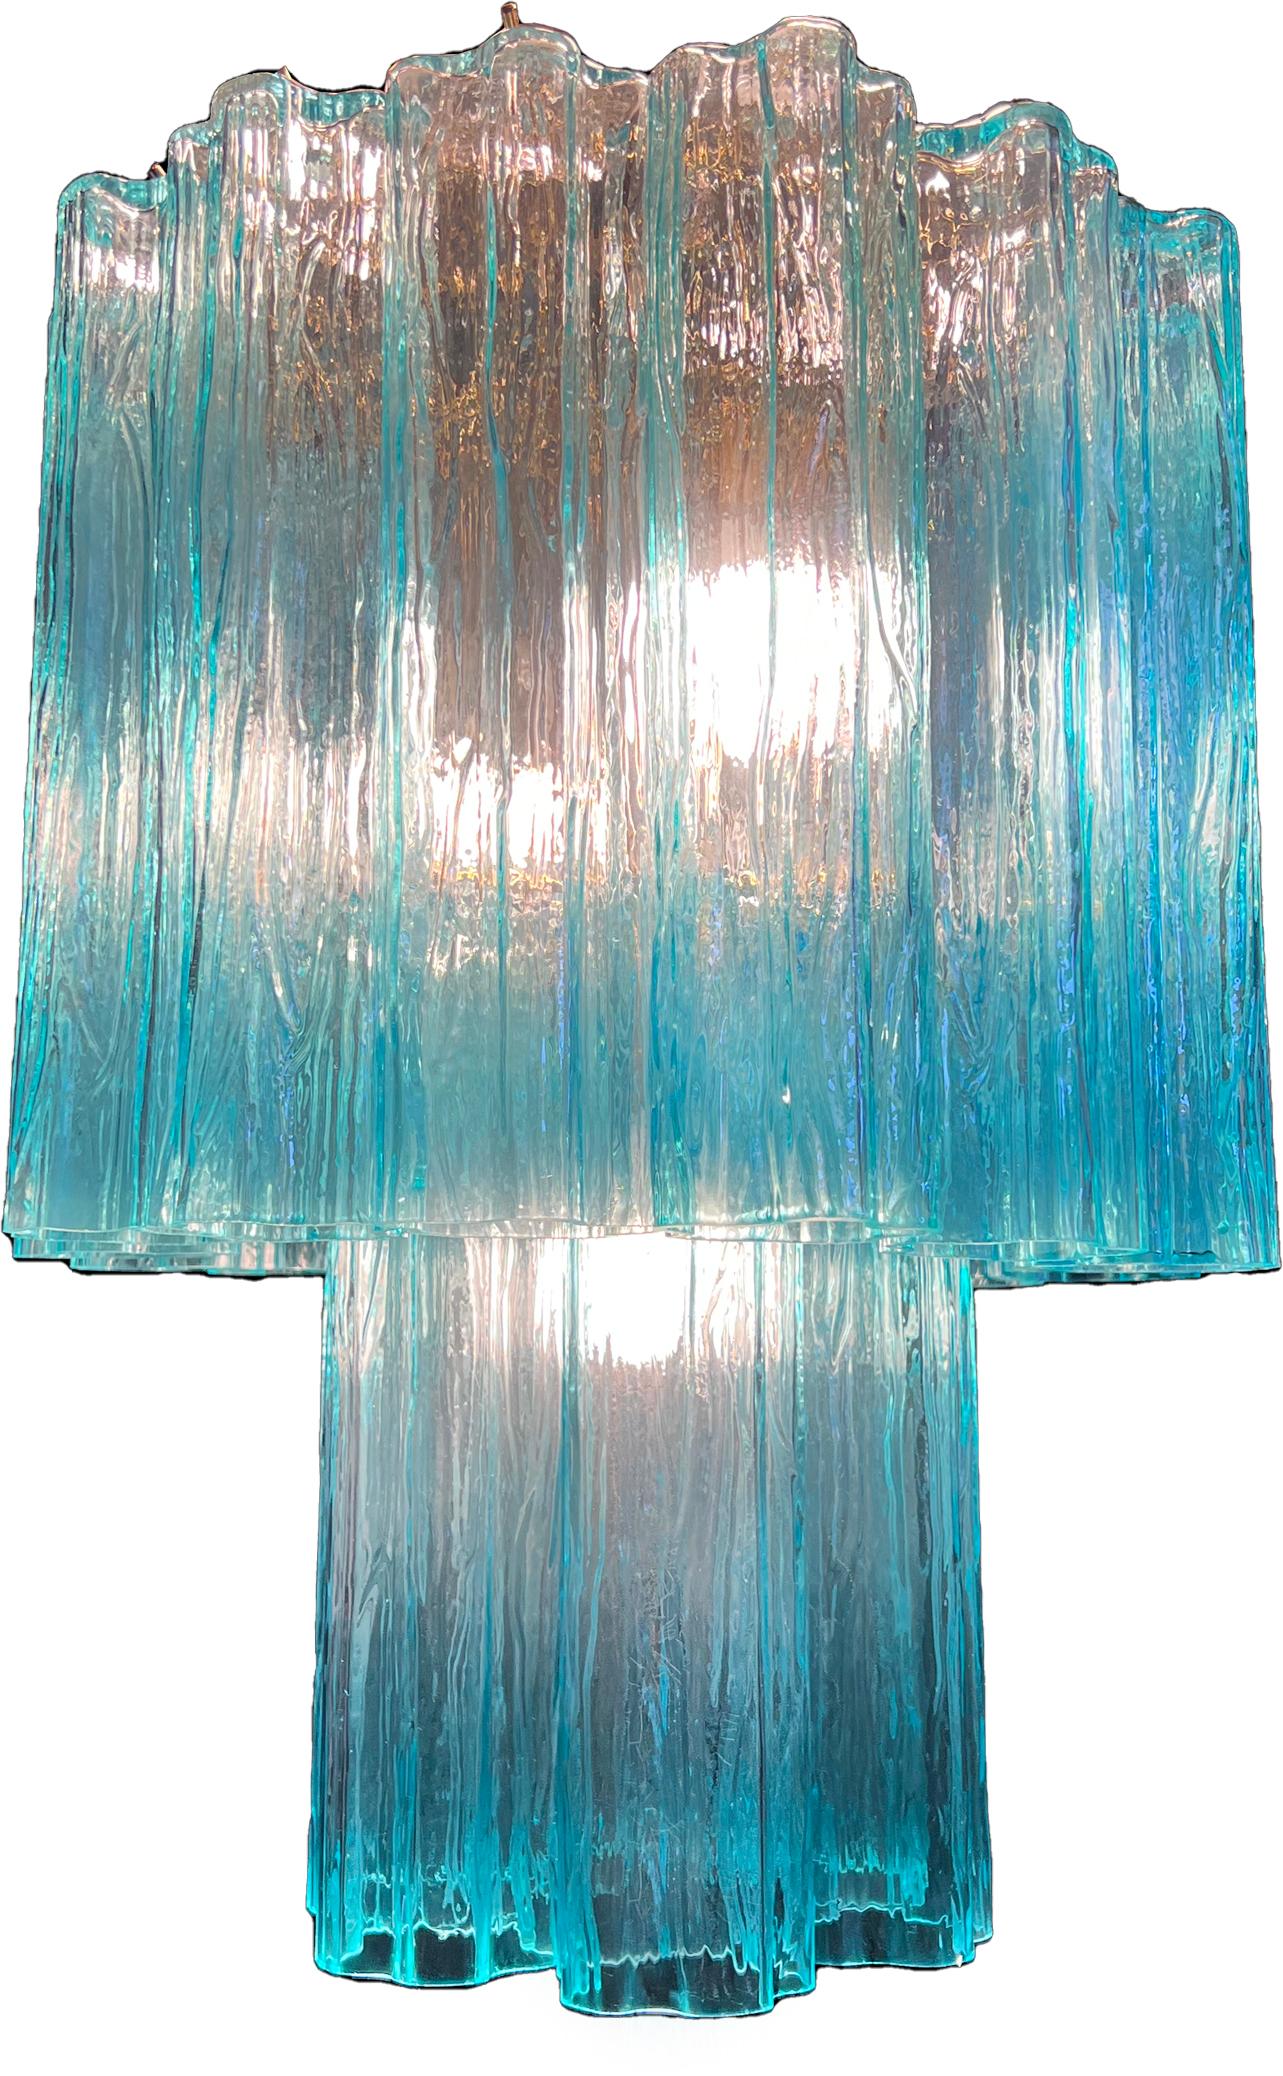 Glass Elegant Pair of Italian Blue Chandeliers by Valentina Planta, Murano For Sale